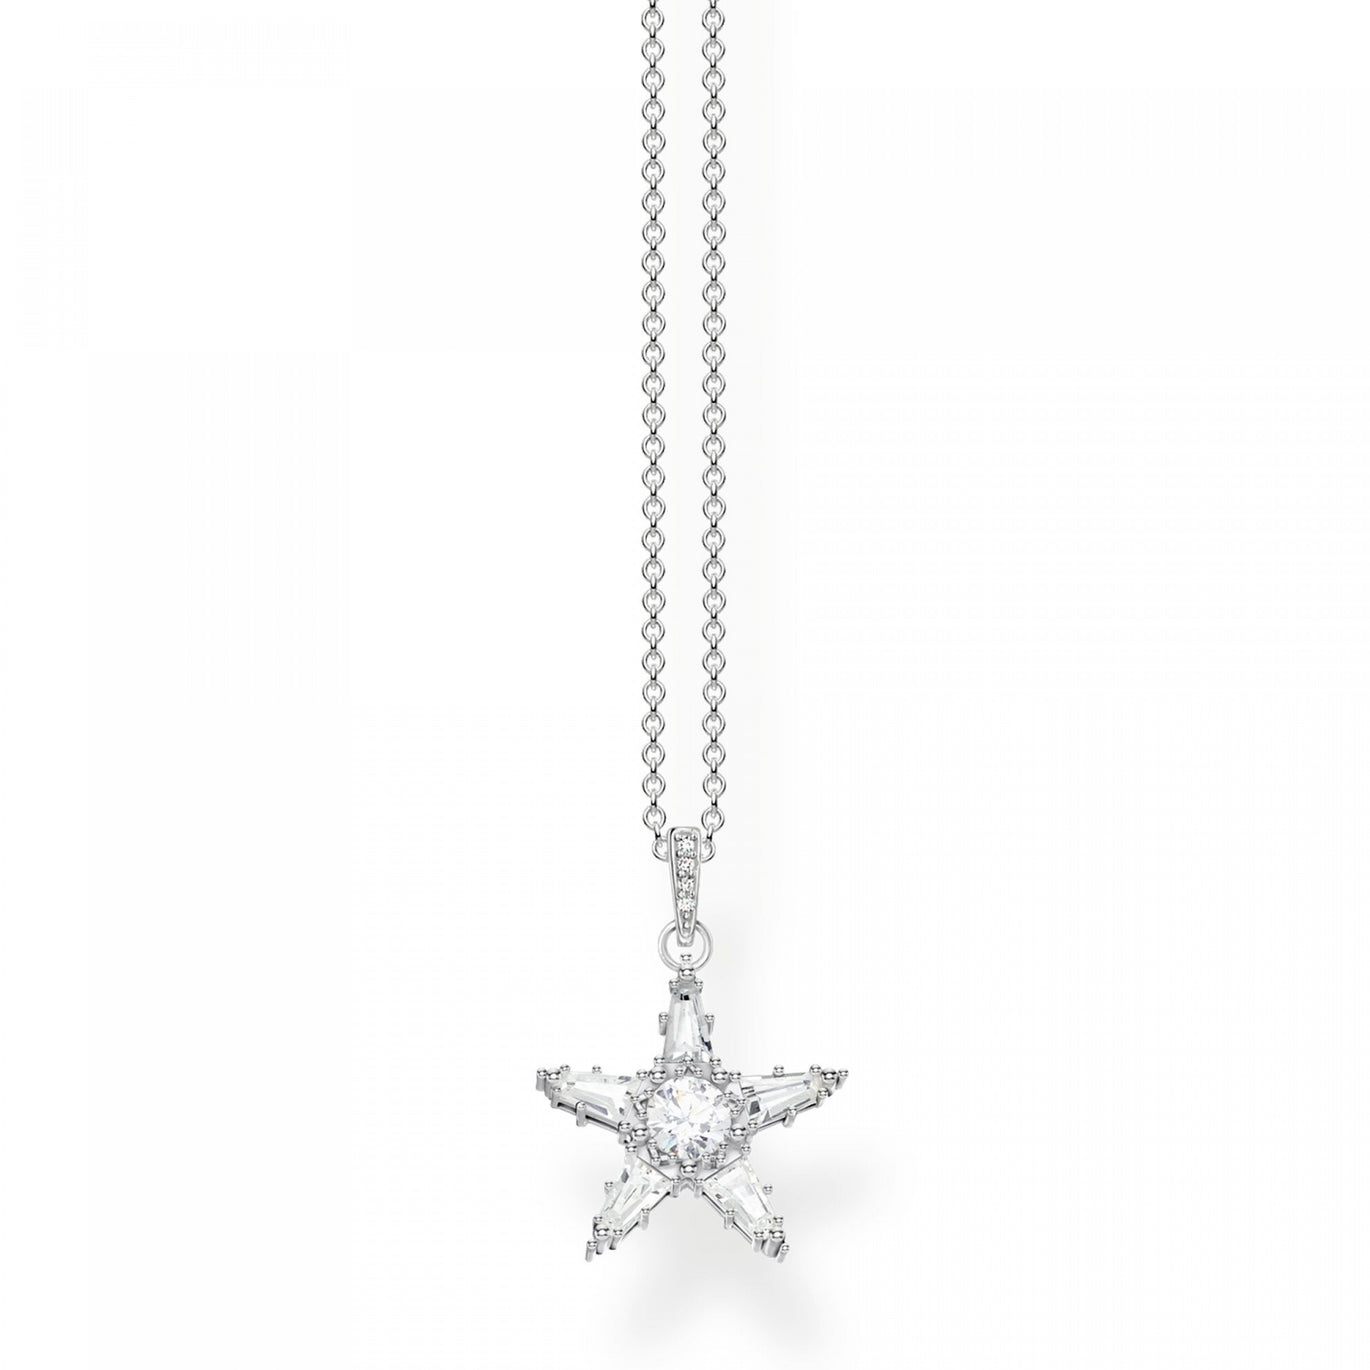 Thomas Sabo Star Necklace, Sterling Silver